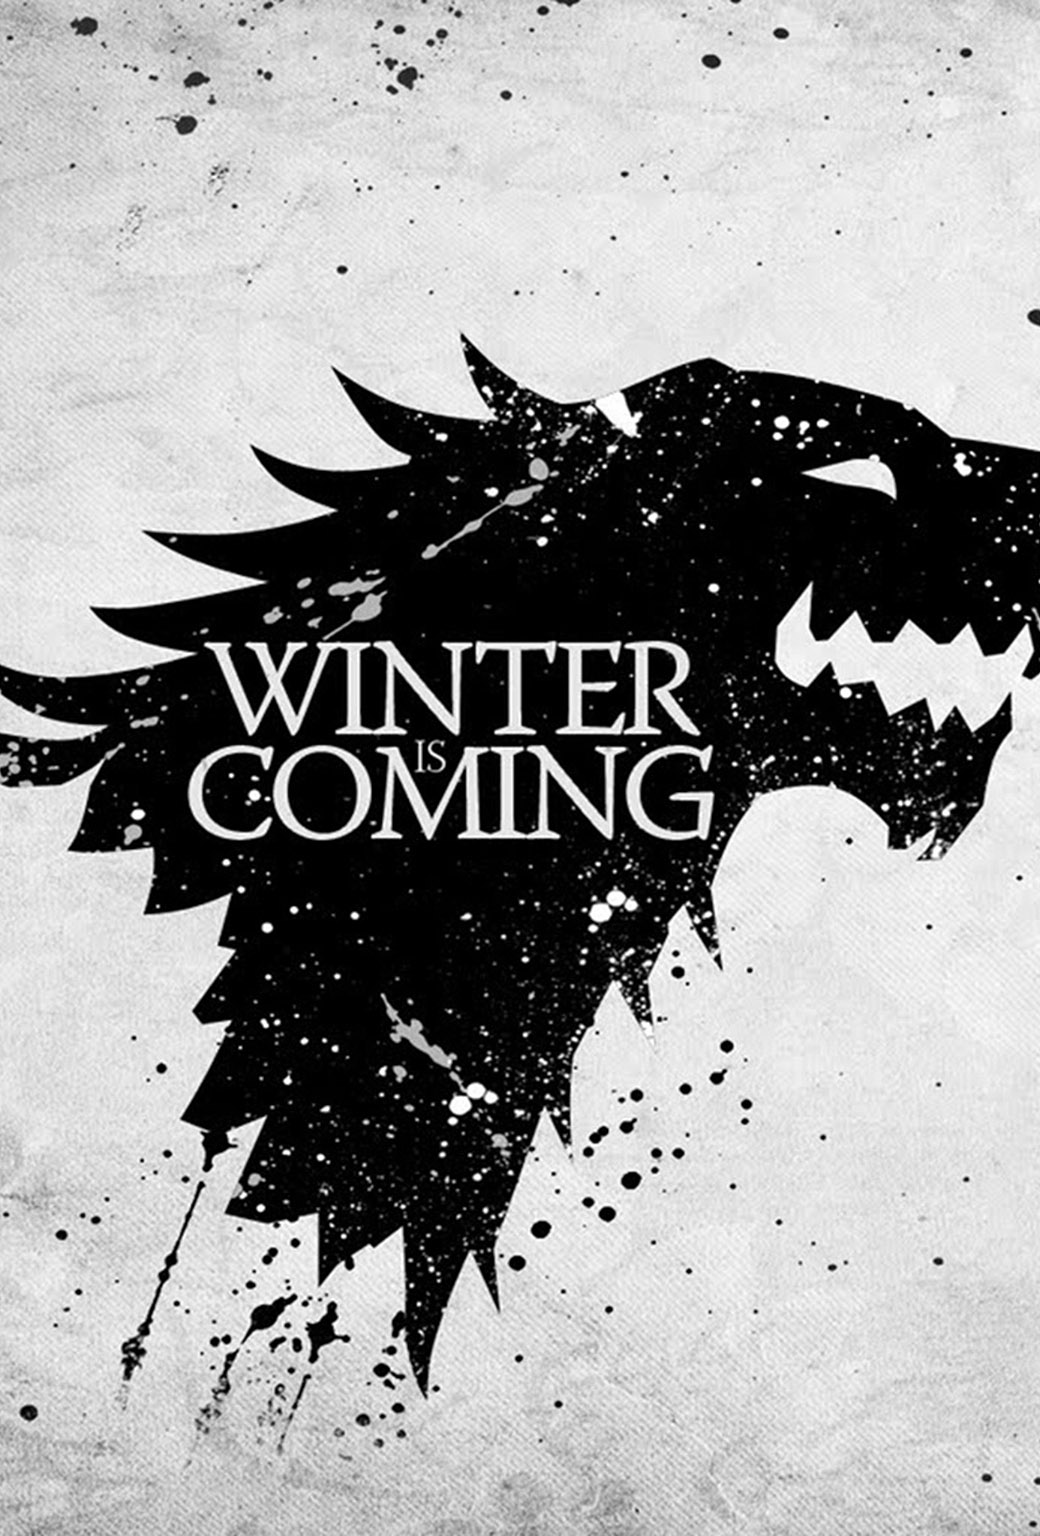 winter is coming wallpaper,font,text,graphic design,illustration,poster